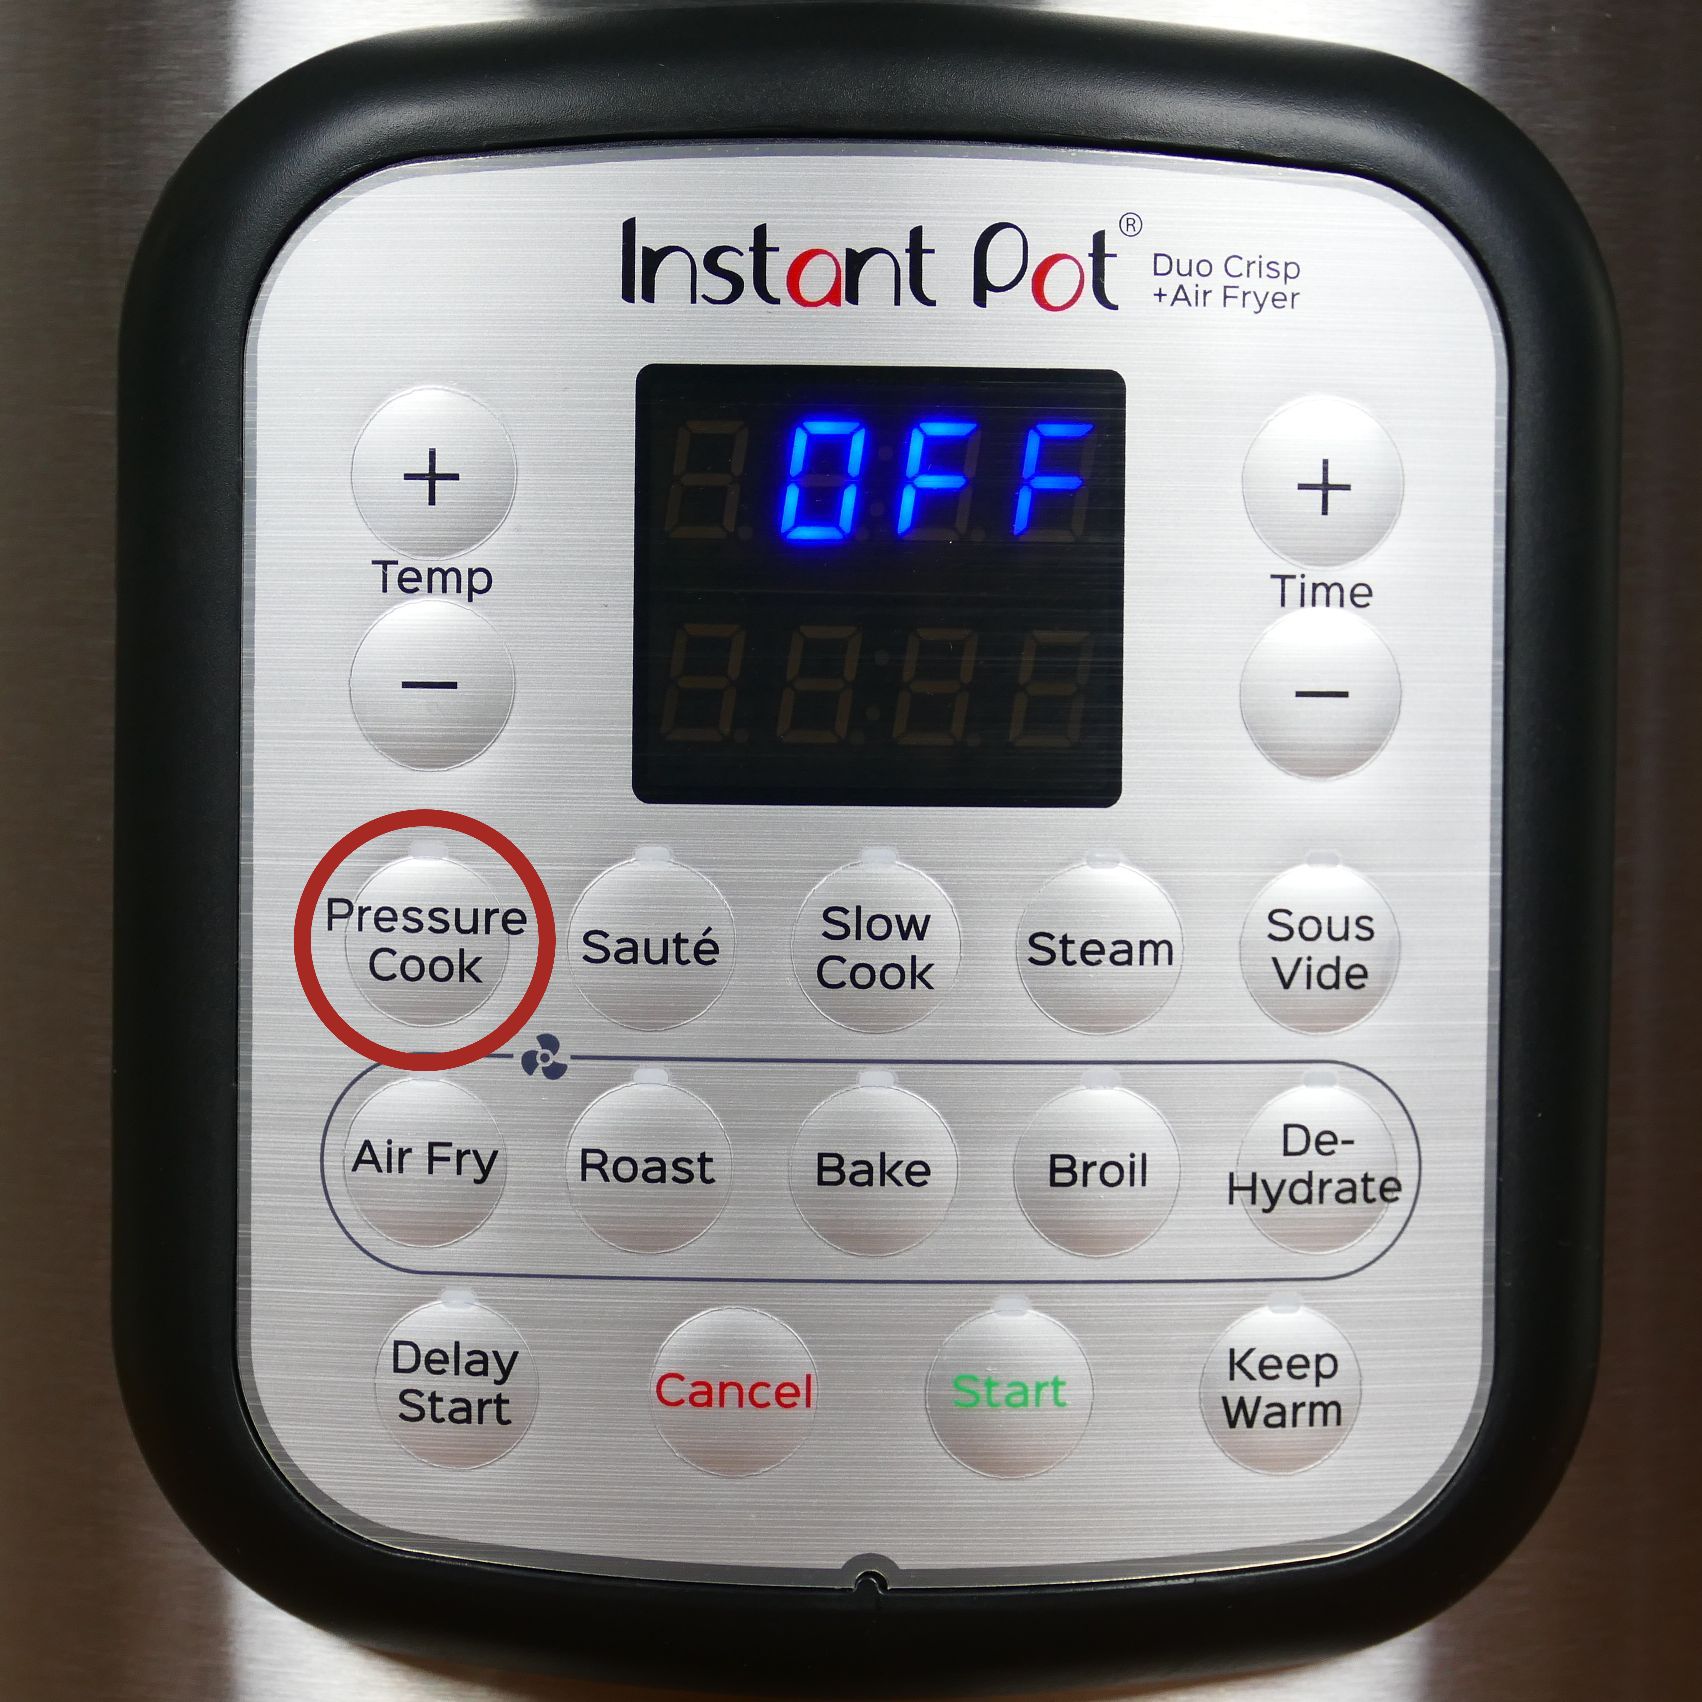 Instant Pot Duo Crisp Display Panel Pressure Cook button circled in red